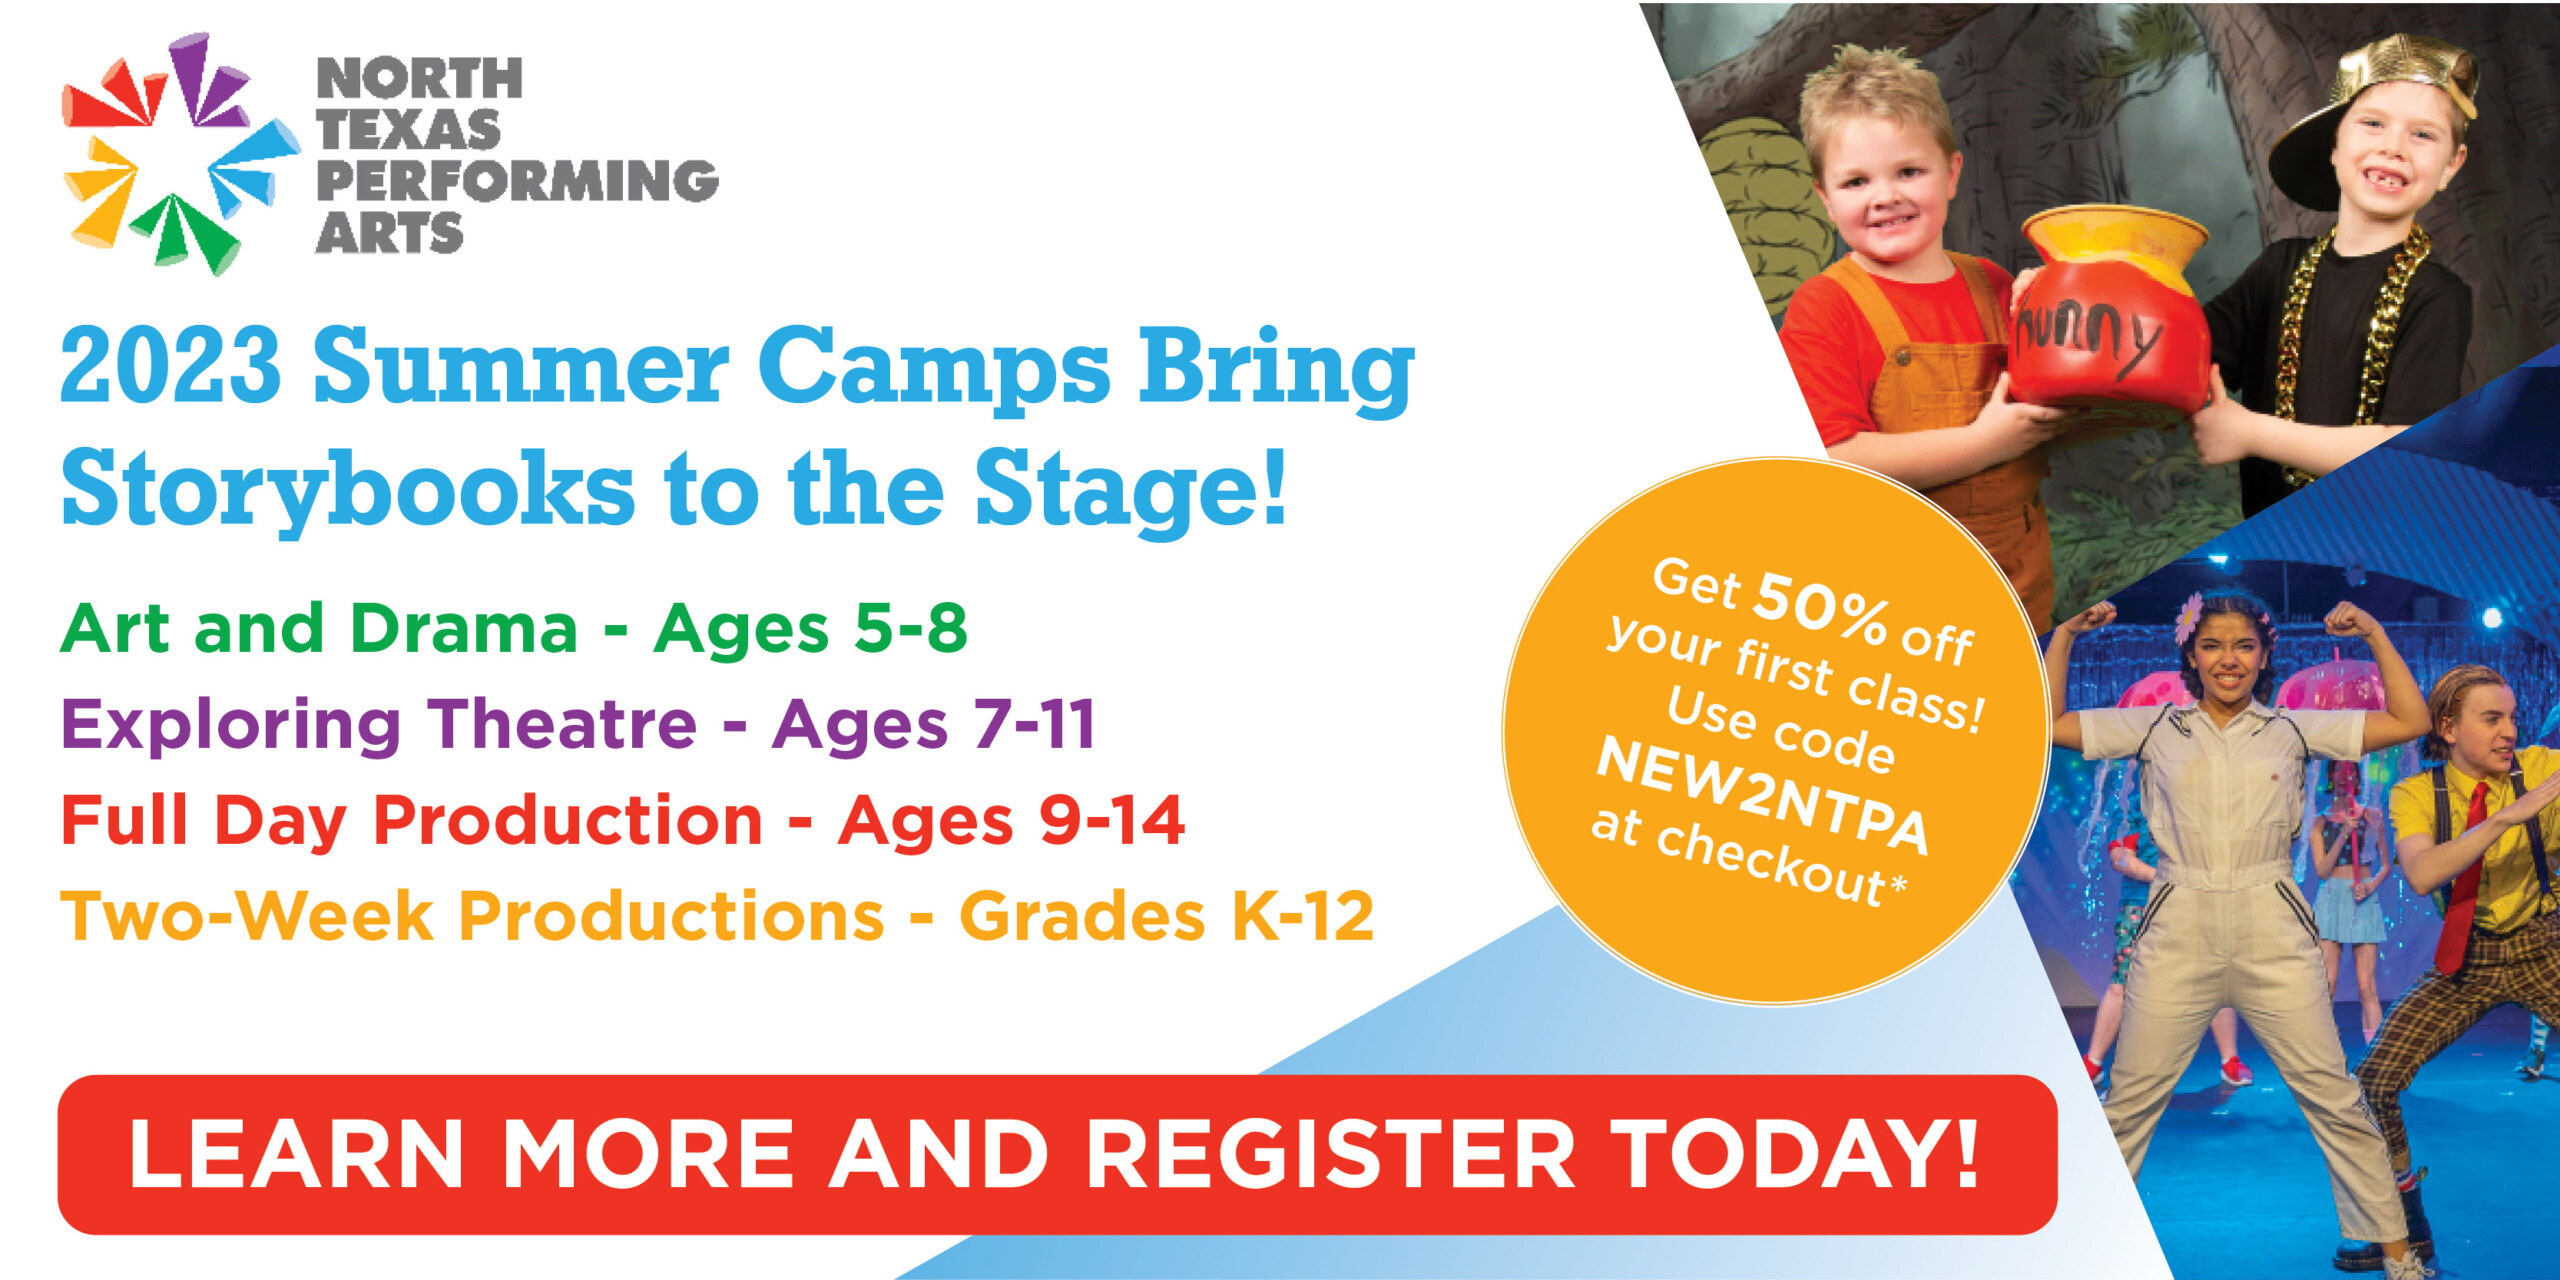 2023 Summer Camps Bring Storybooks to the Stage! LEARN MORE AND REGISTER TODAY!